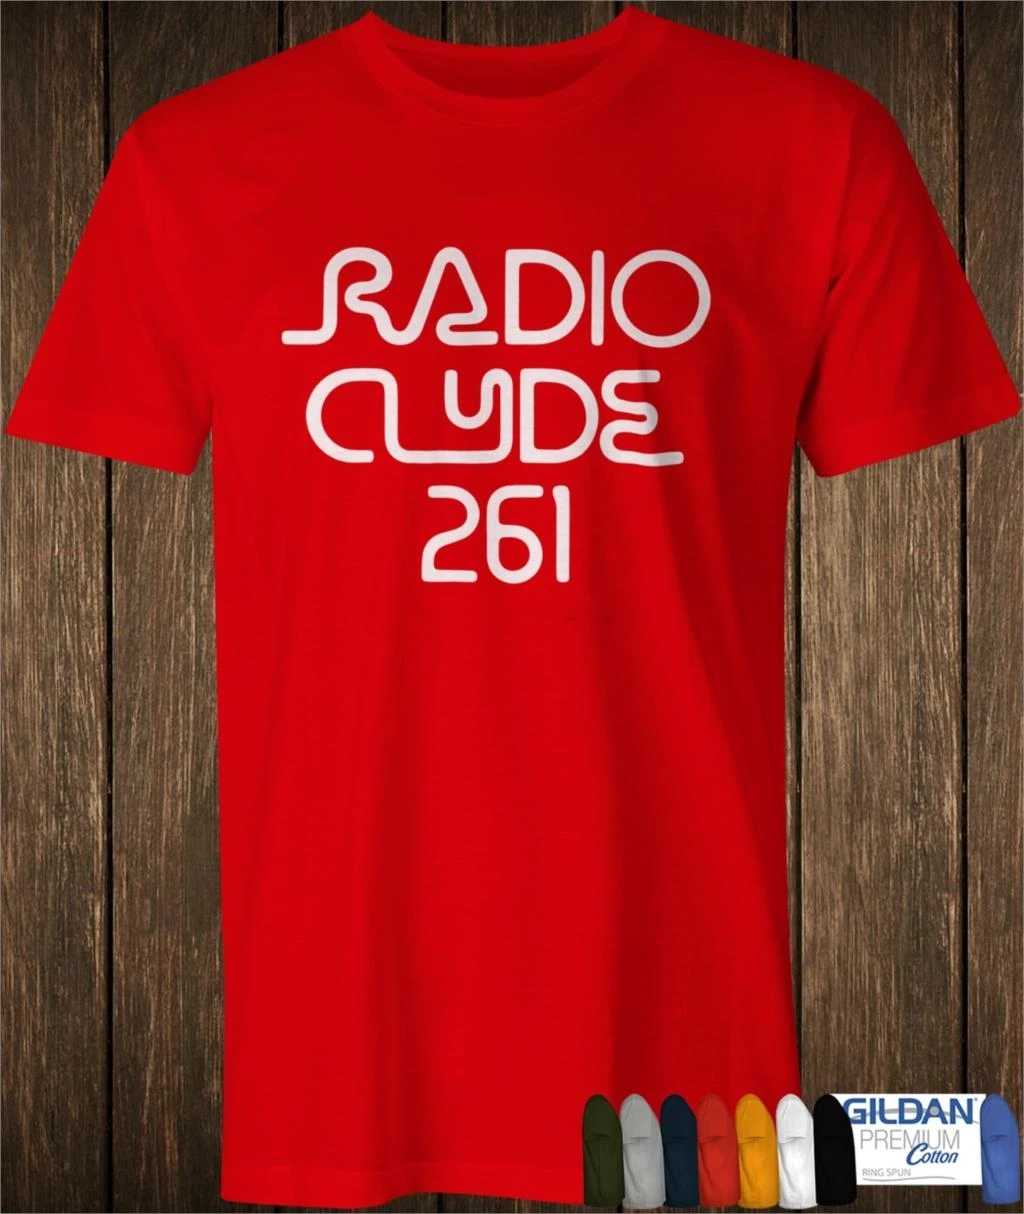 

Radio Clyde 261 T-Shirt Worn By Frank Zappa 70S 70S Classic Rock Band Music Tee Brand Clothes Summer 2019